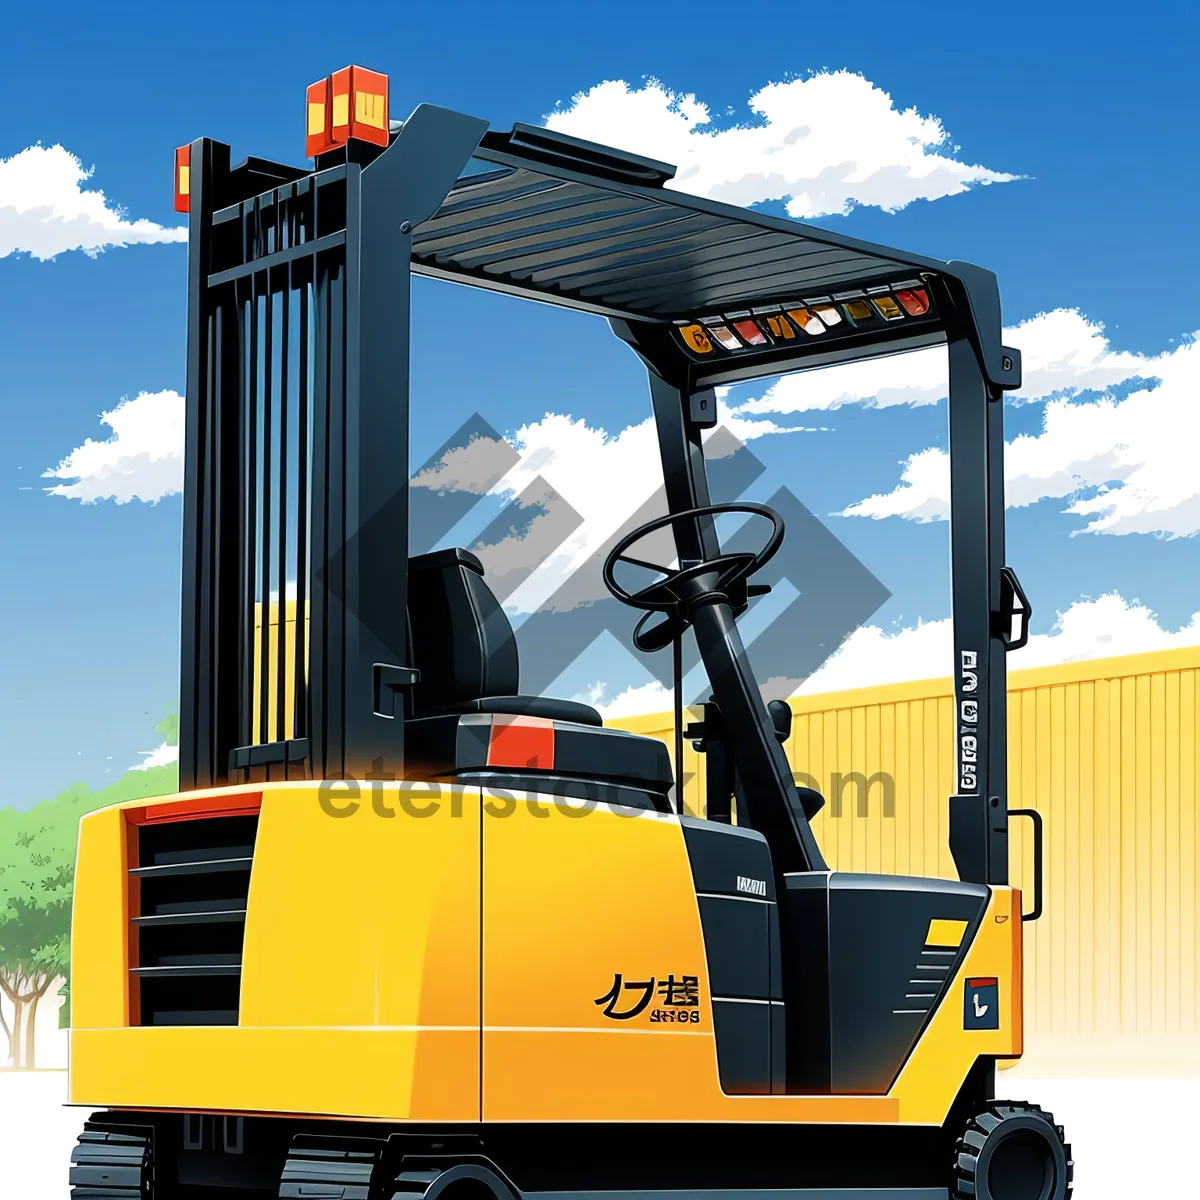 Picture of Yellow industrial forklift transporting heavy cargo